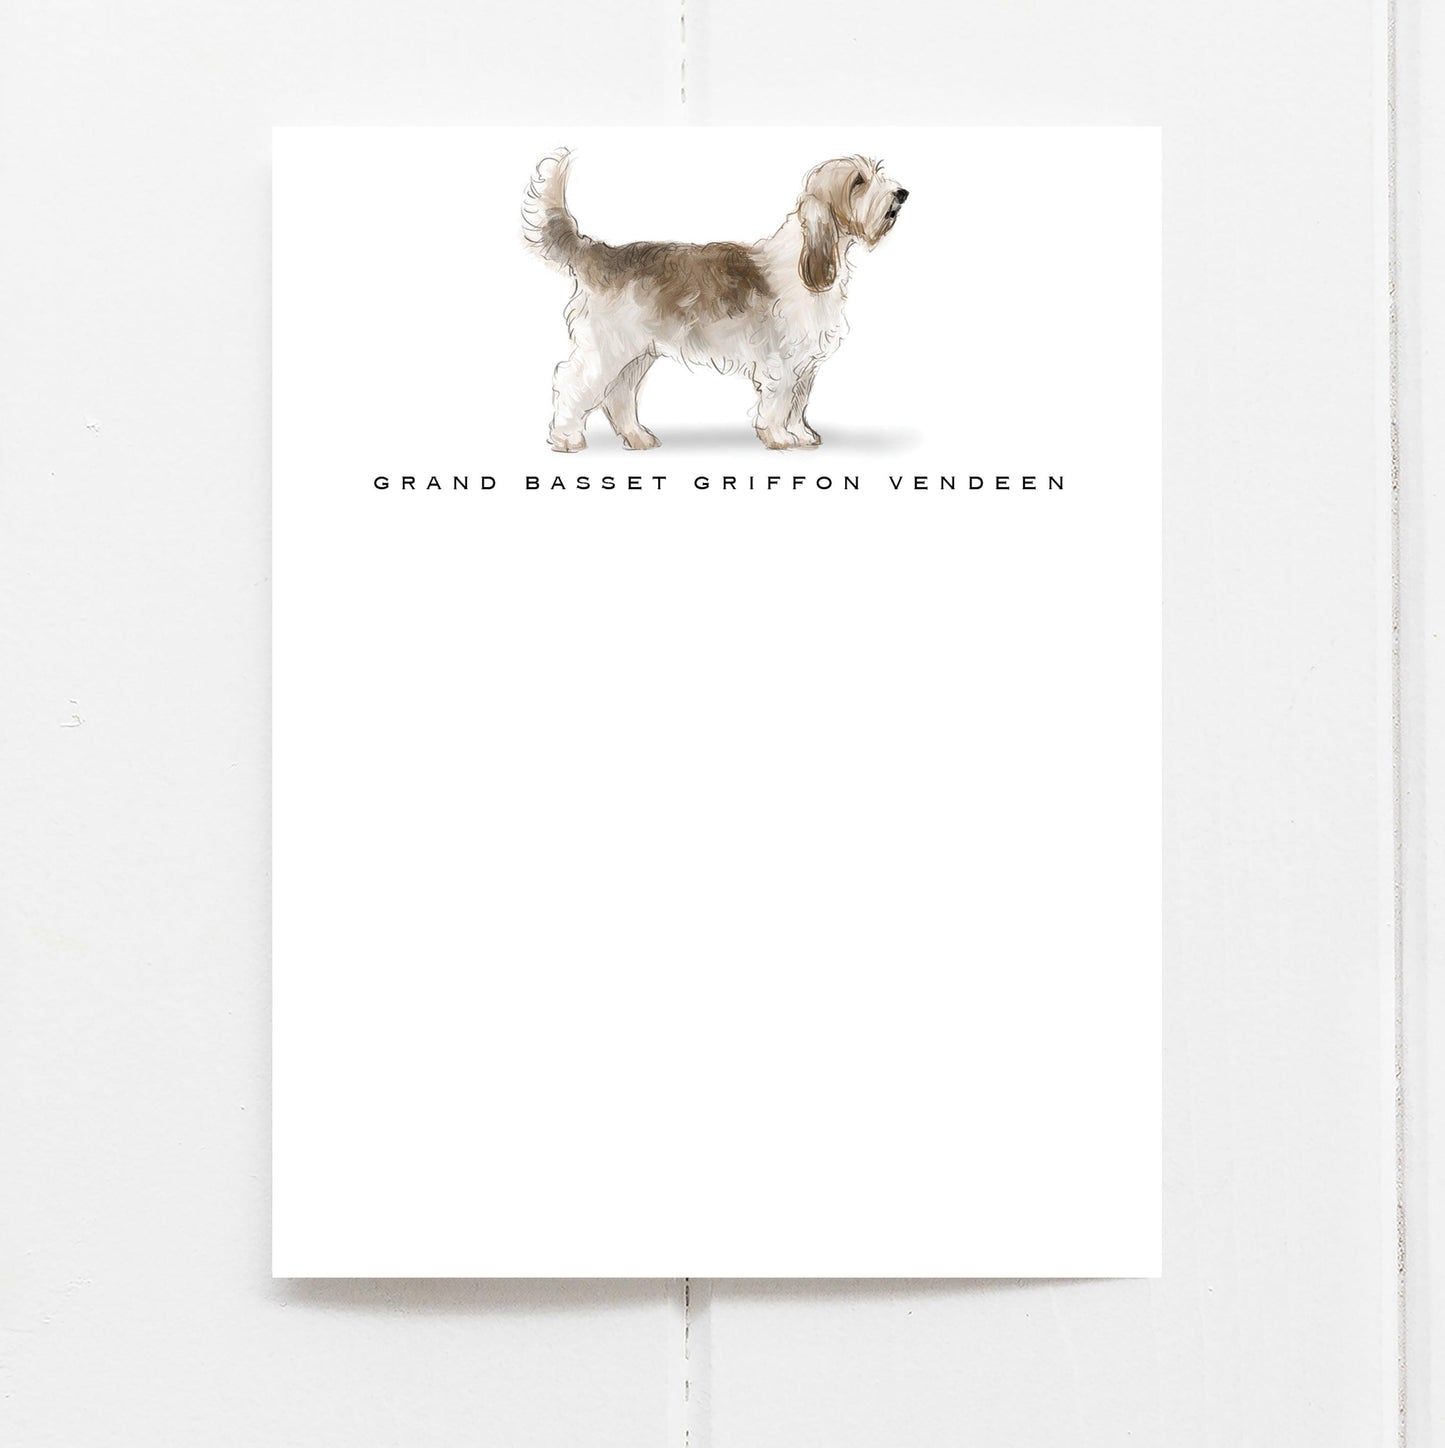 Grand Basset Griffon Vendeen note cards with hand drawn dog and breed name